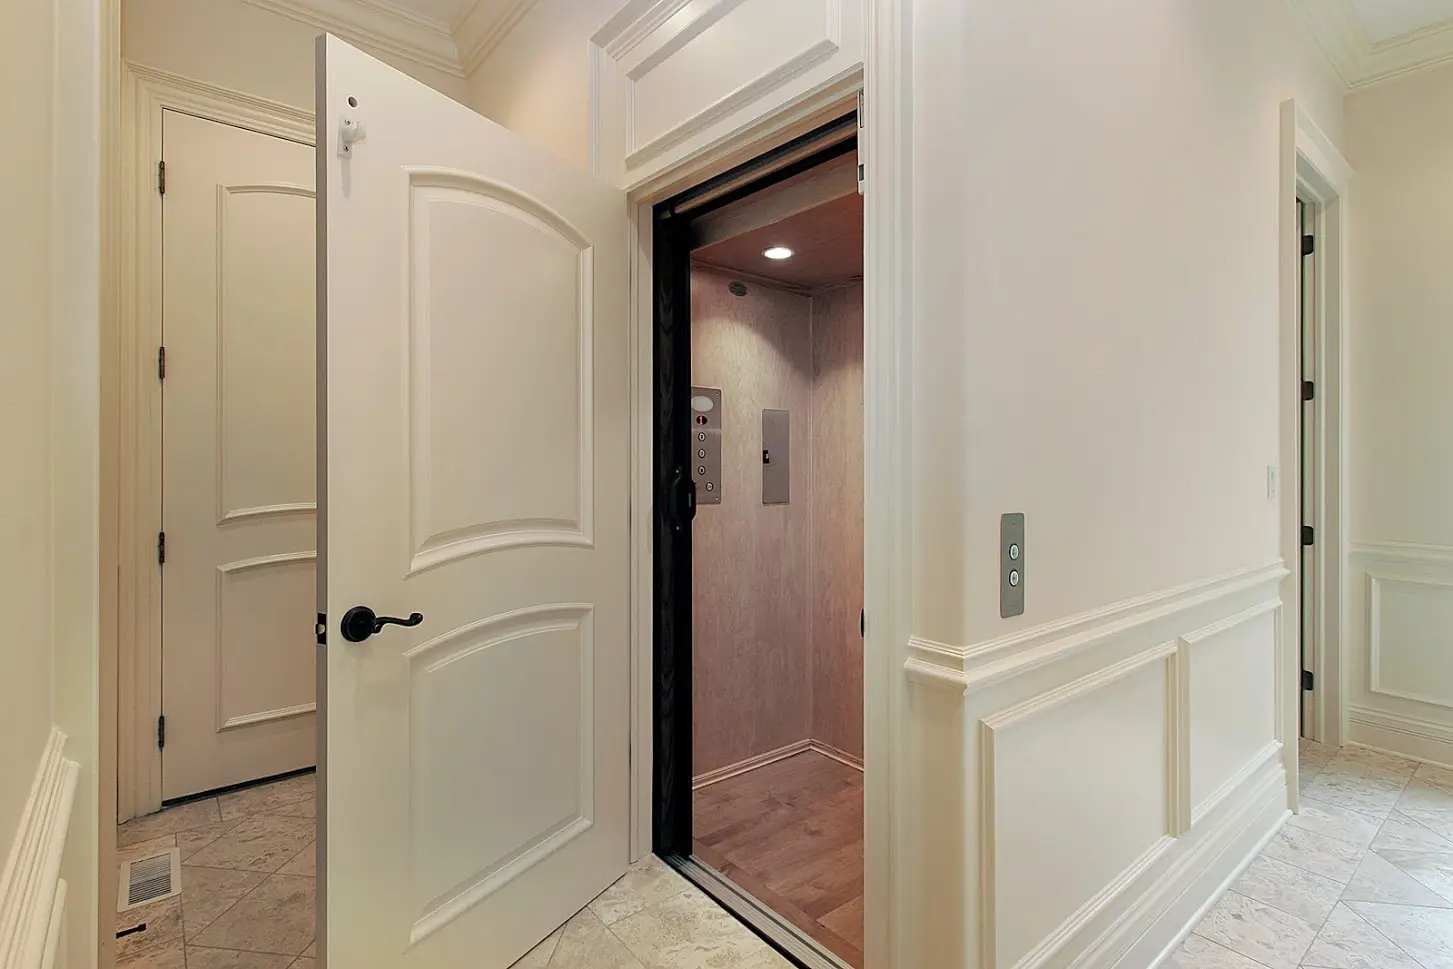 The five benefits of installing a home lift